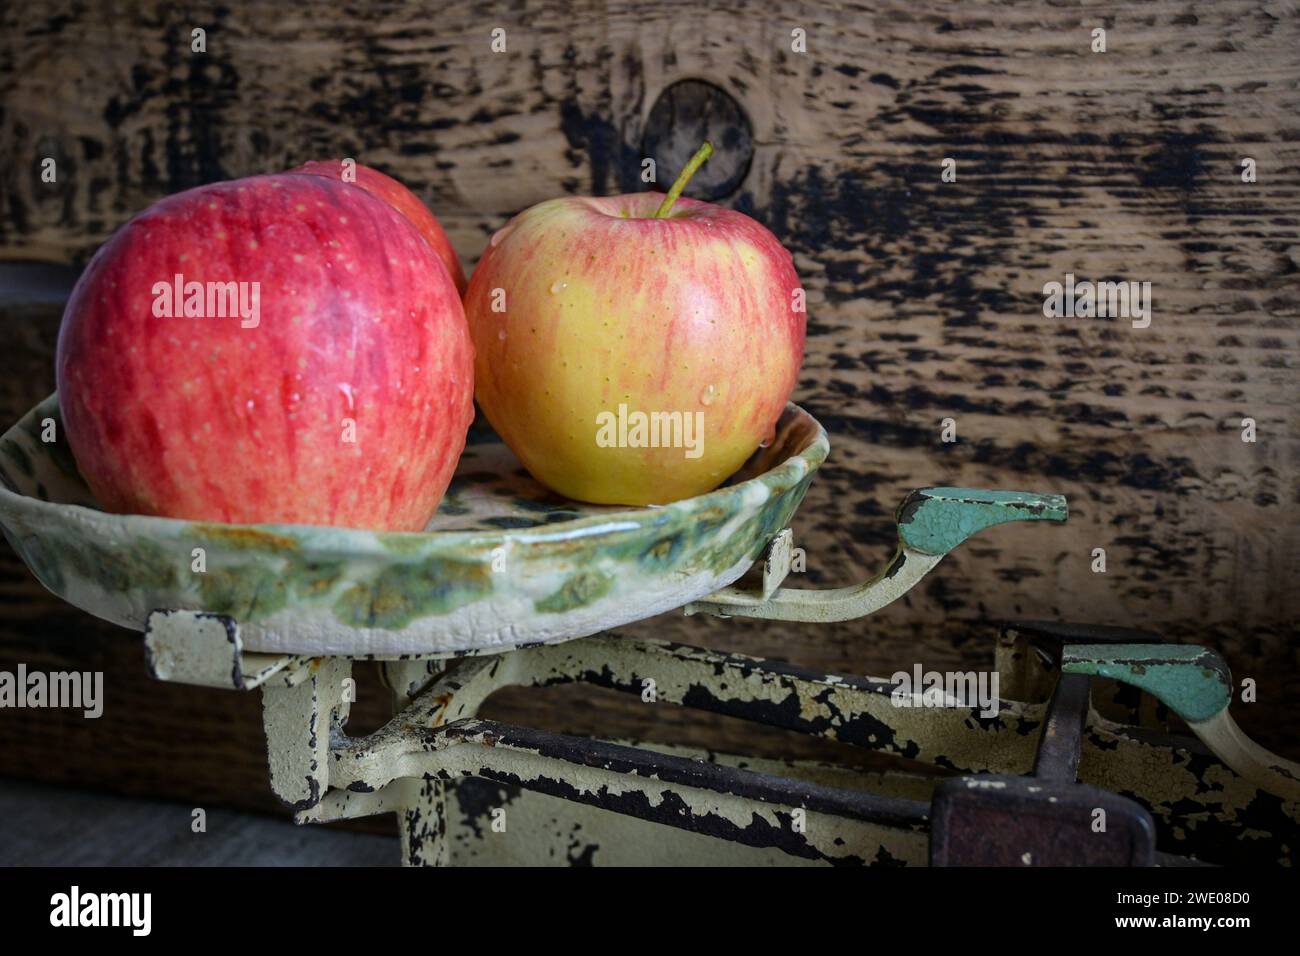 red apple on a scale and wooden background, retro style - side view. Stock Photo